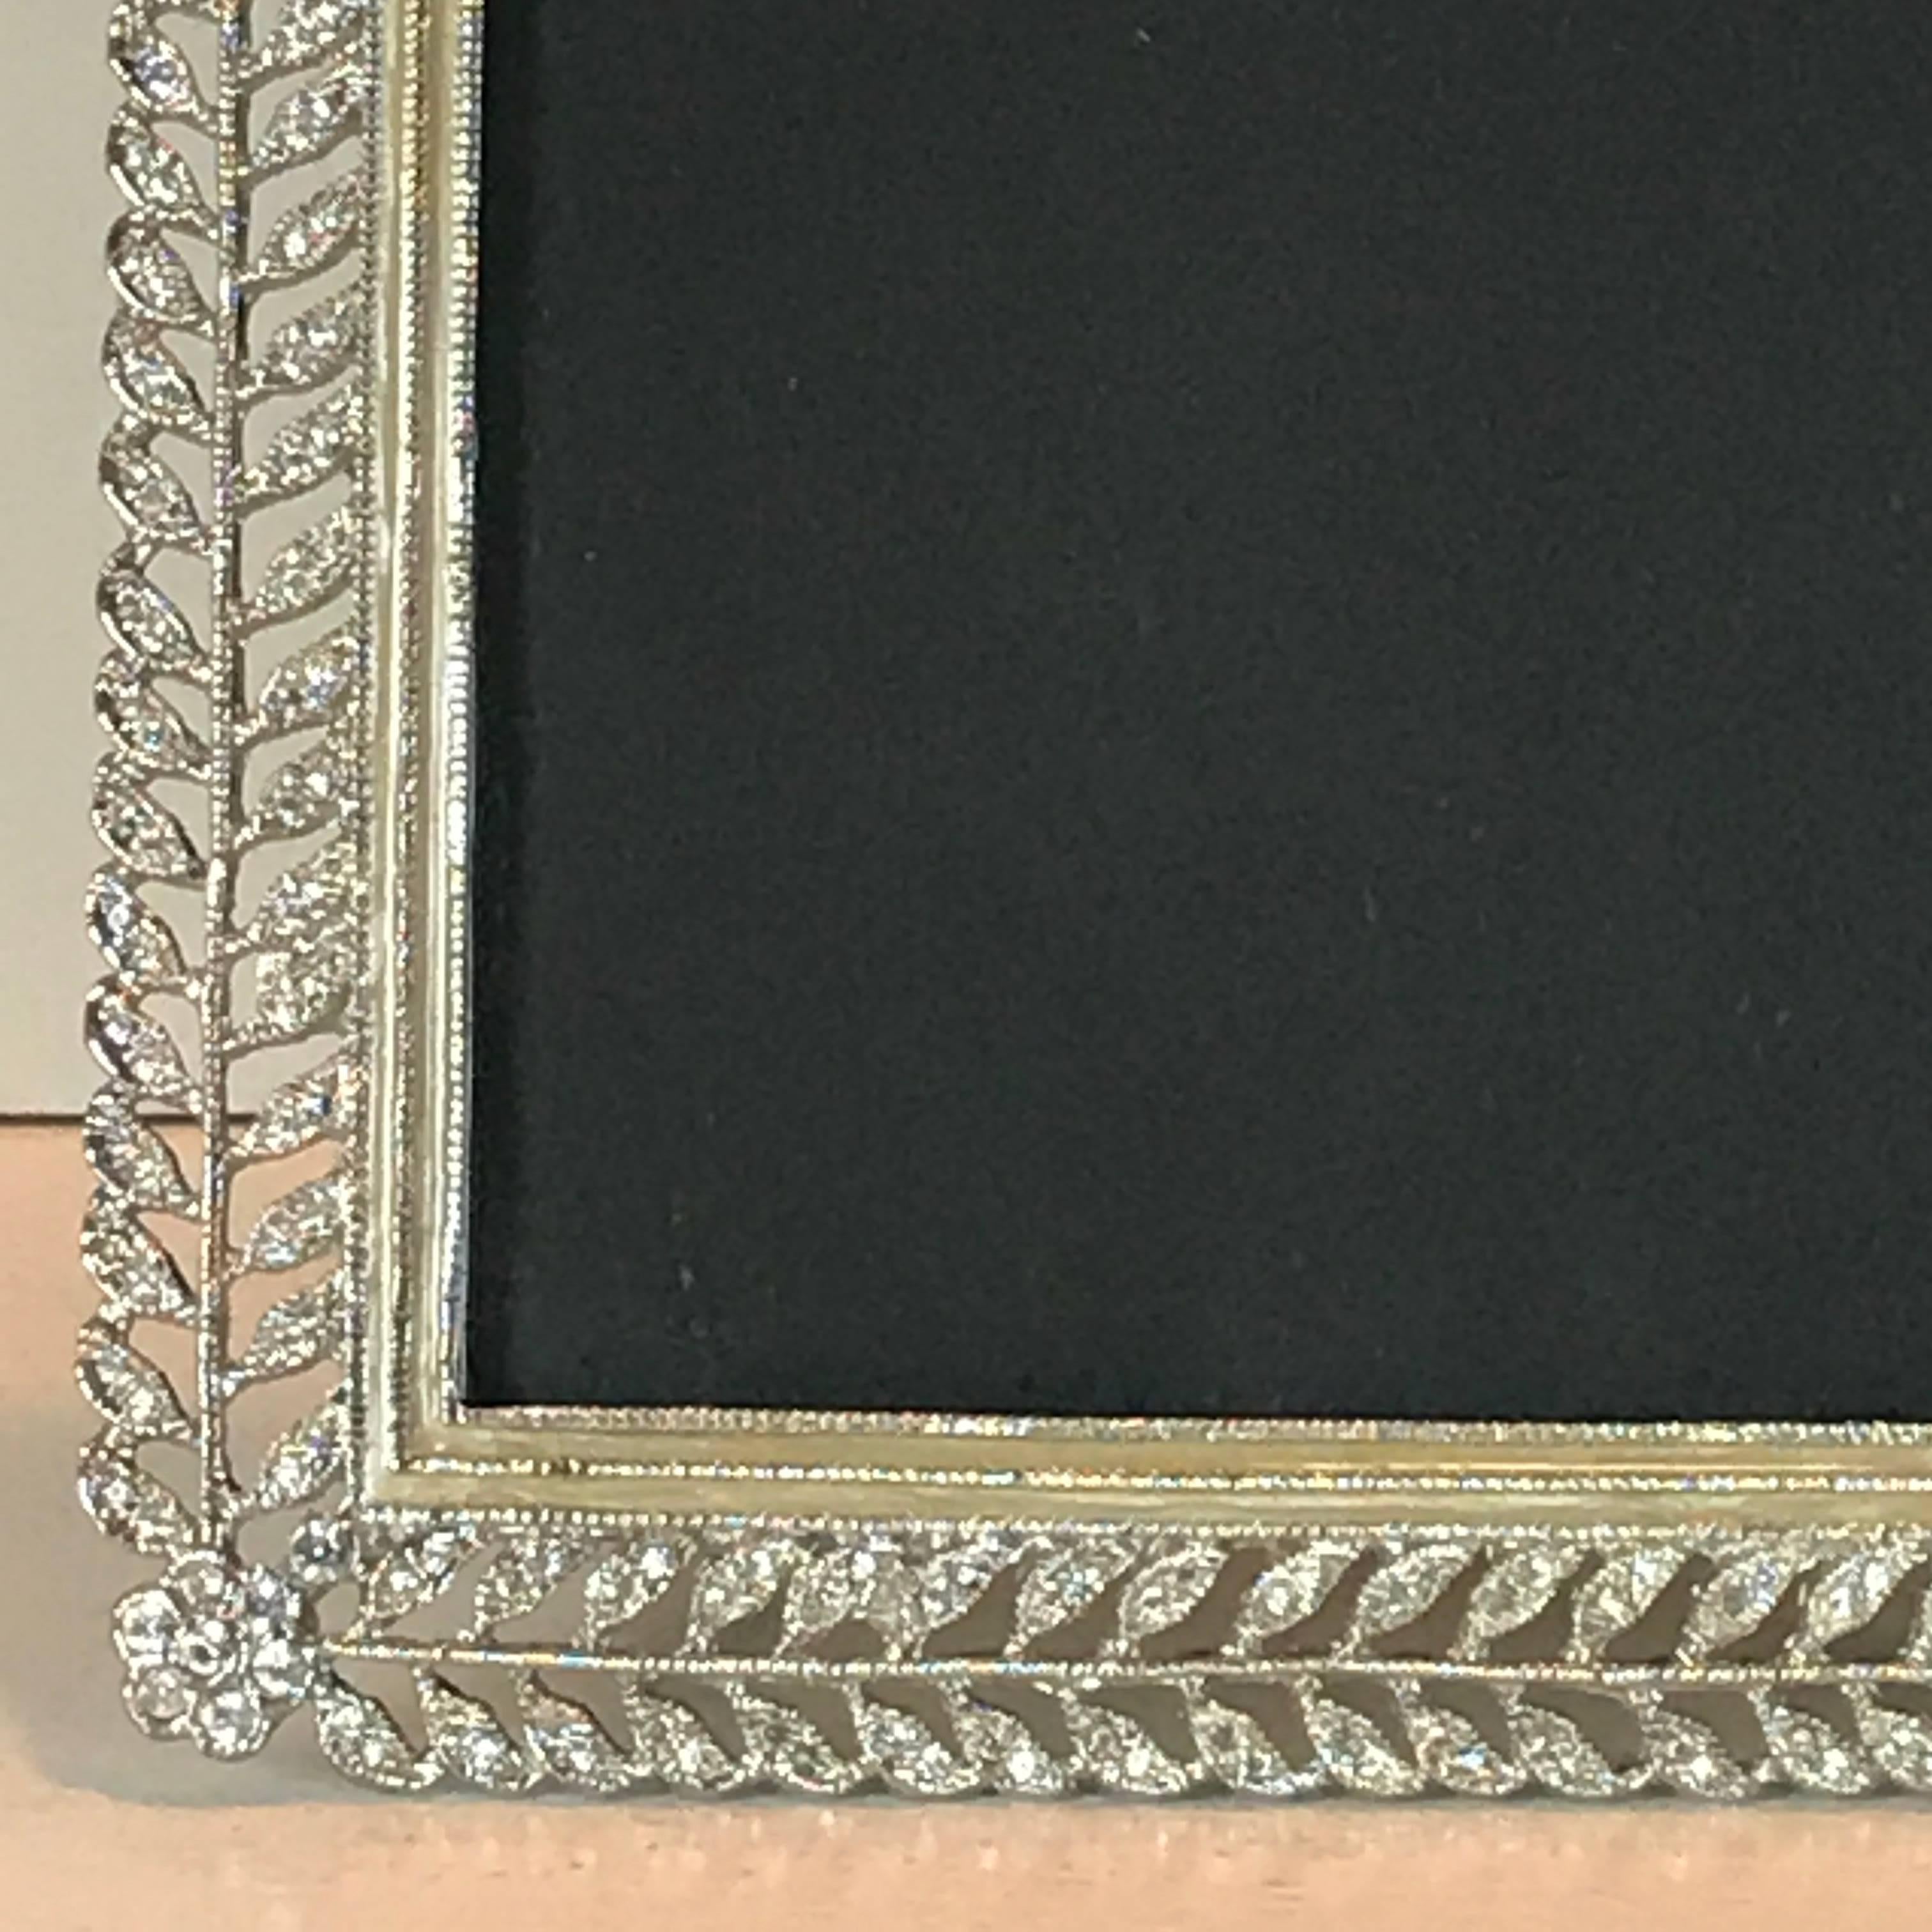 Exquisite Paste Russian Style Frame In Good Condition For Sale In West Palm Beach, FL